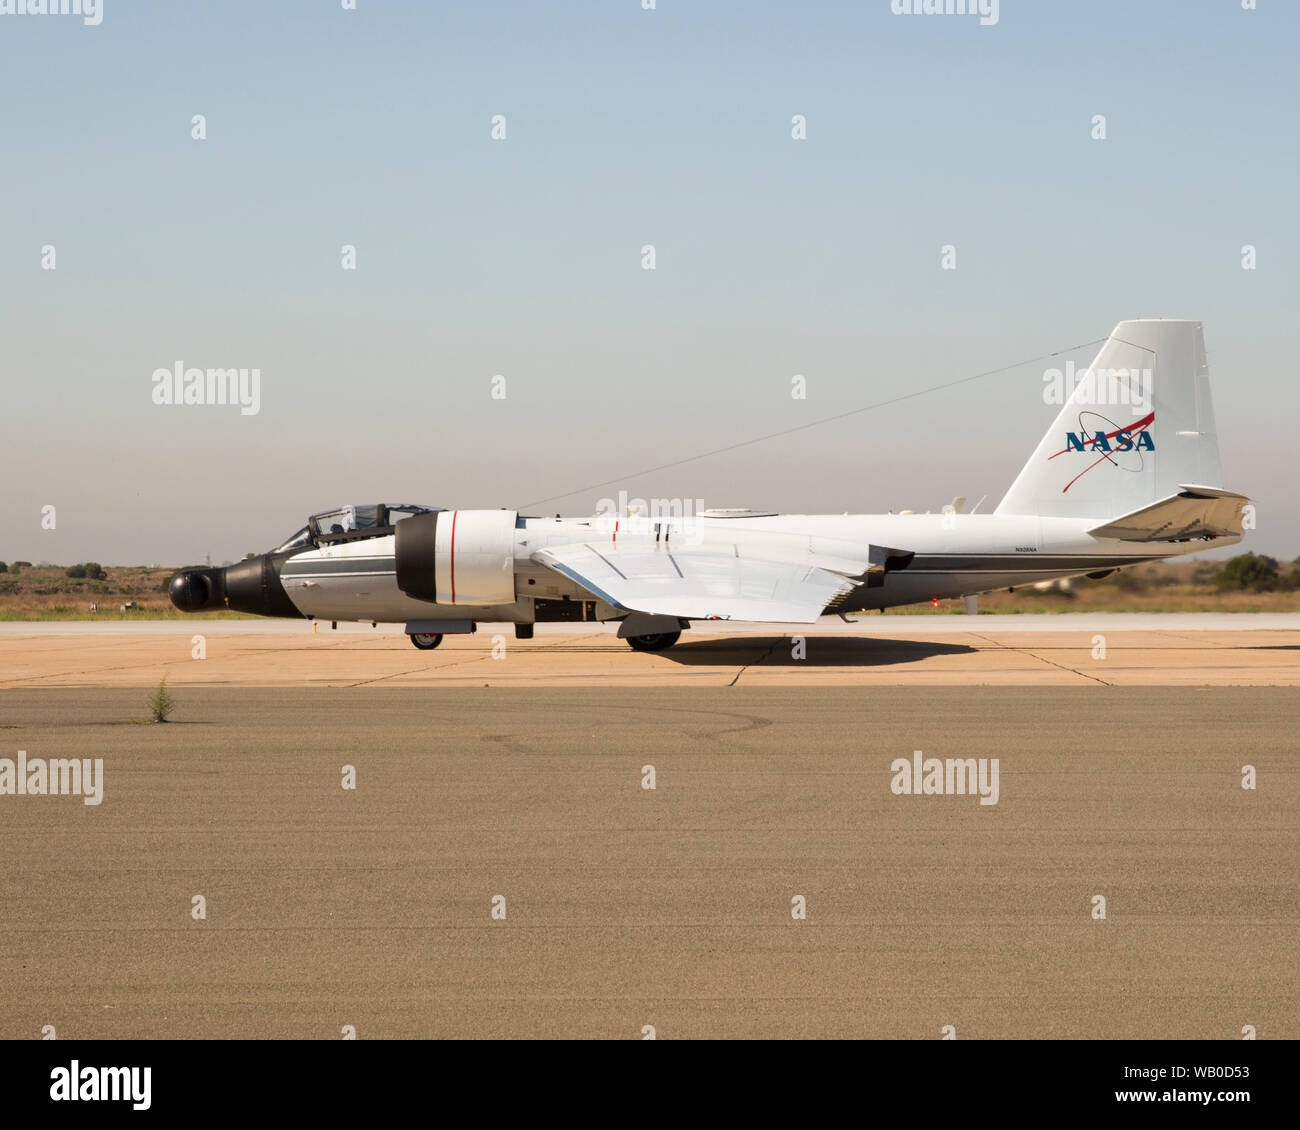 A NASA WB-47 prepares to take off from the flight line of Marine Corps Air Station Miramar, Calif., Aug. 21. The aircraft was utilizing the MCAS Miramar flight line and airspace to test new communications software. (U.S. Marine Corps photo by Lance Cpl. Jose GuerreroDeleon) Stock Photo